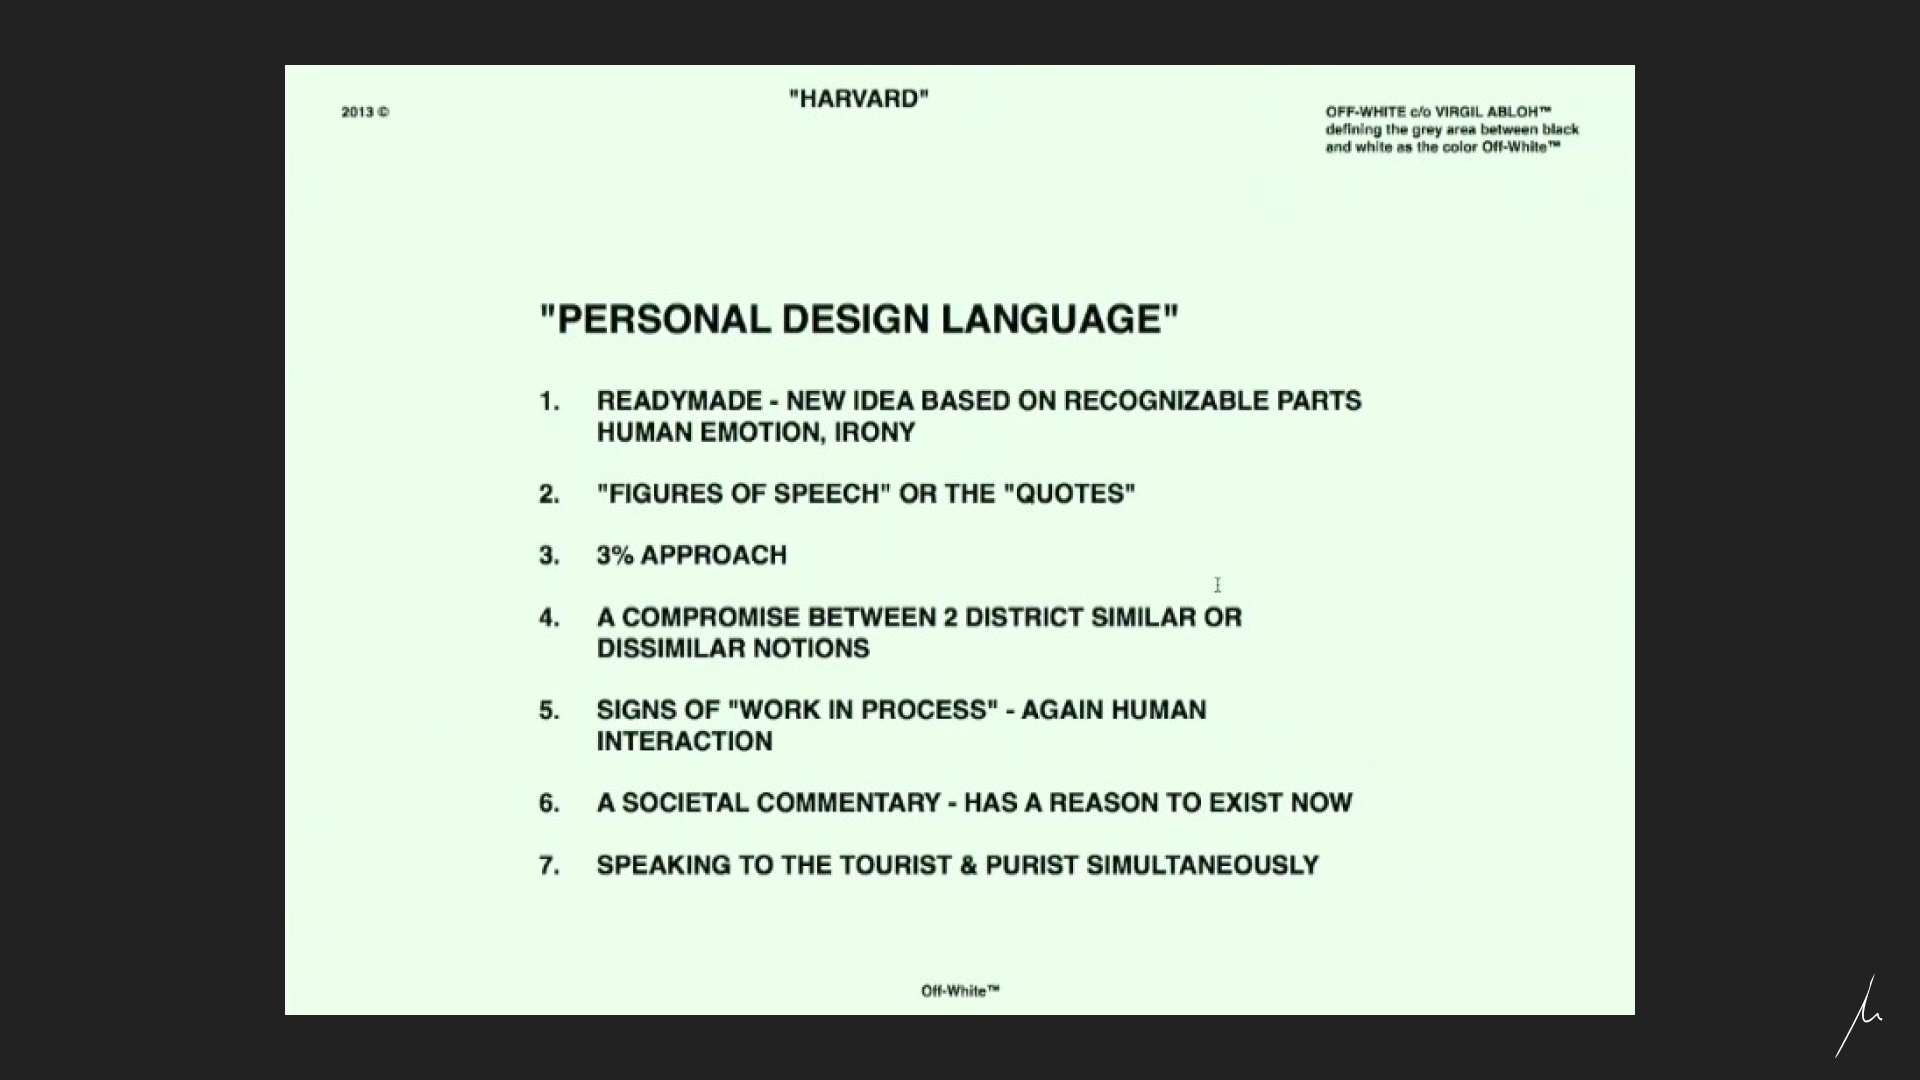 Virgil Abloh's "Personal Design Language" slide from his lecture at the Harvard Graduate School of Design.